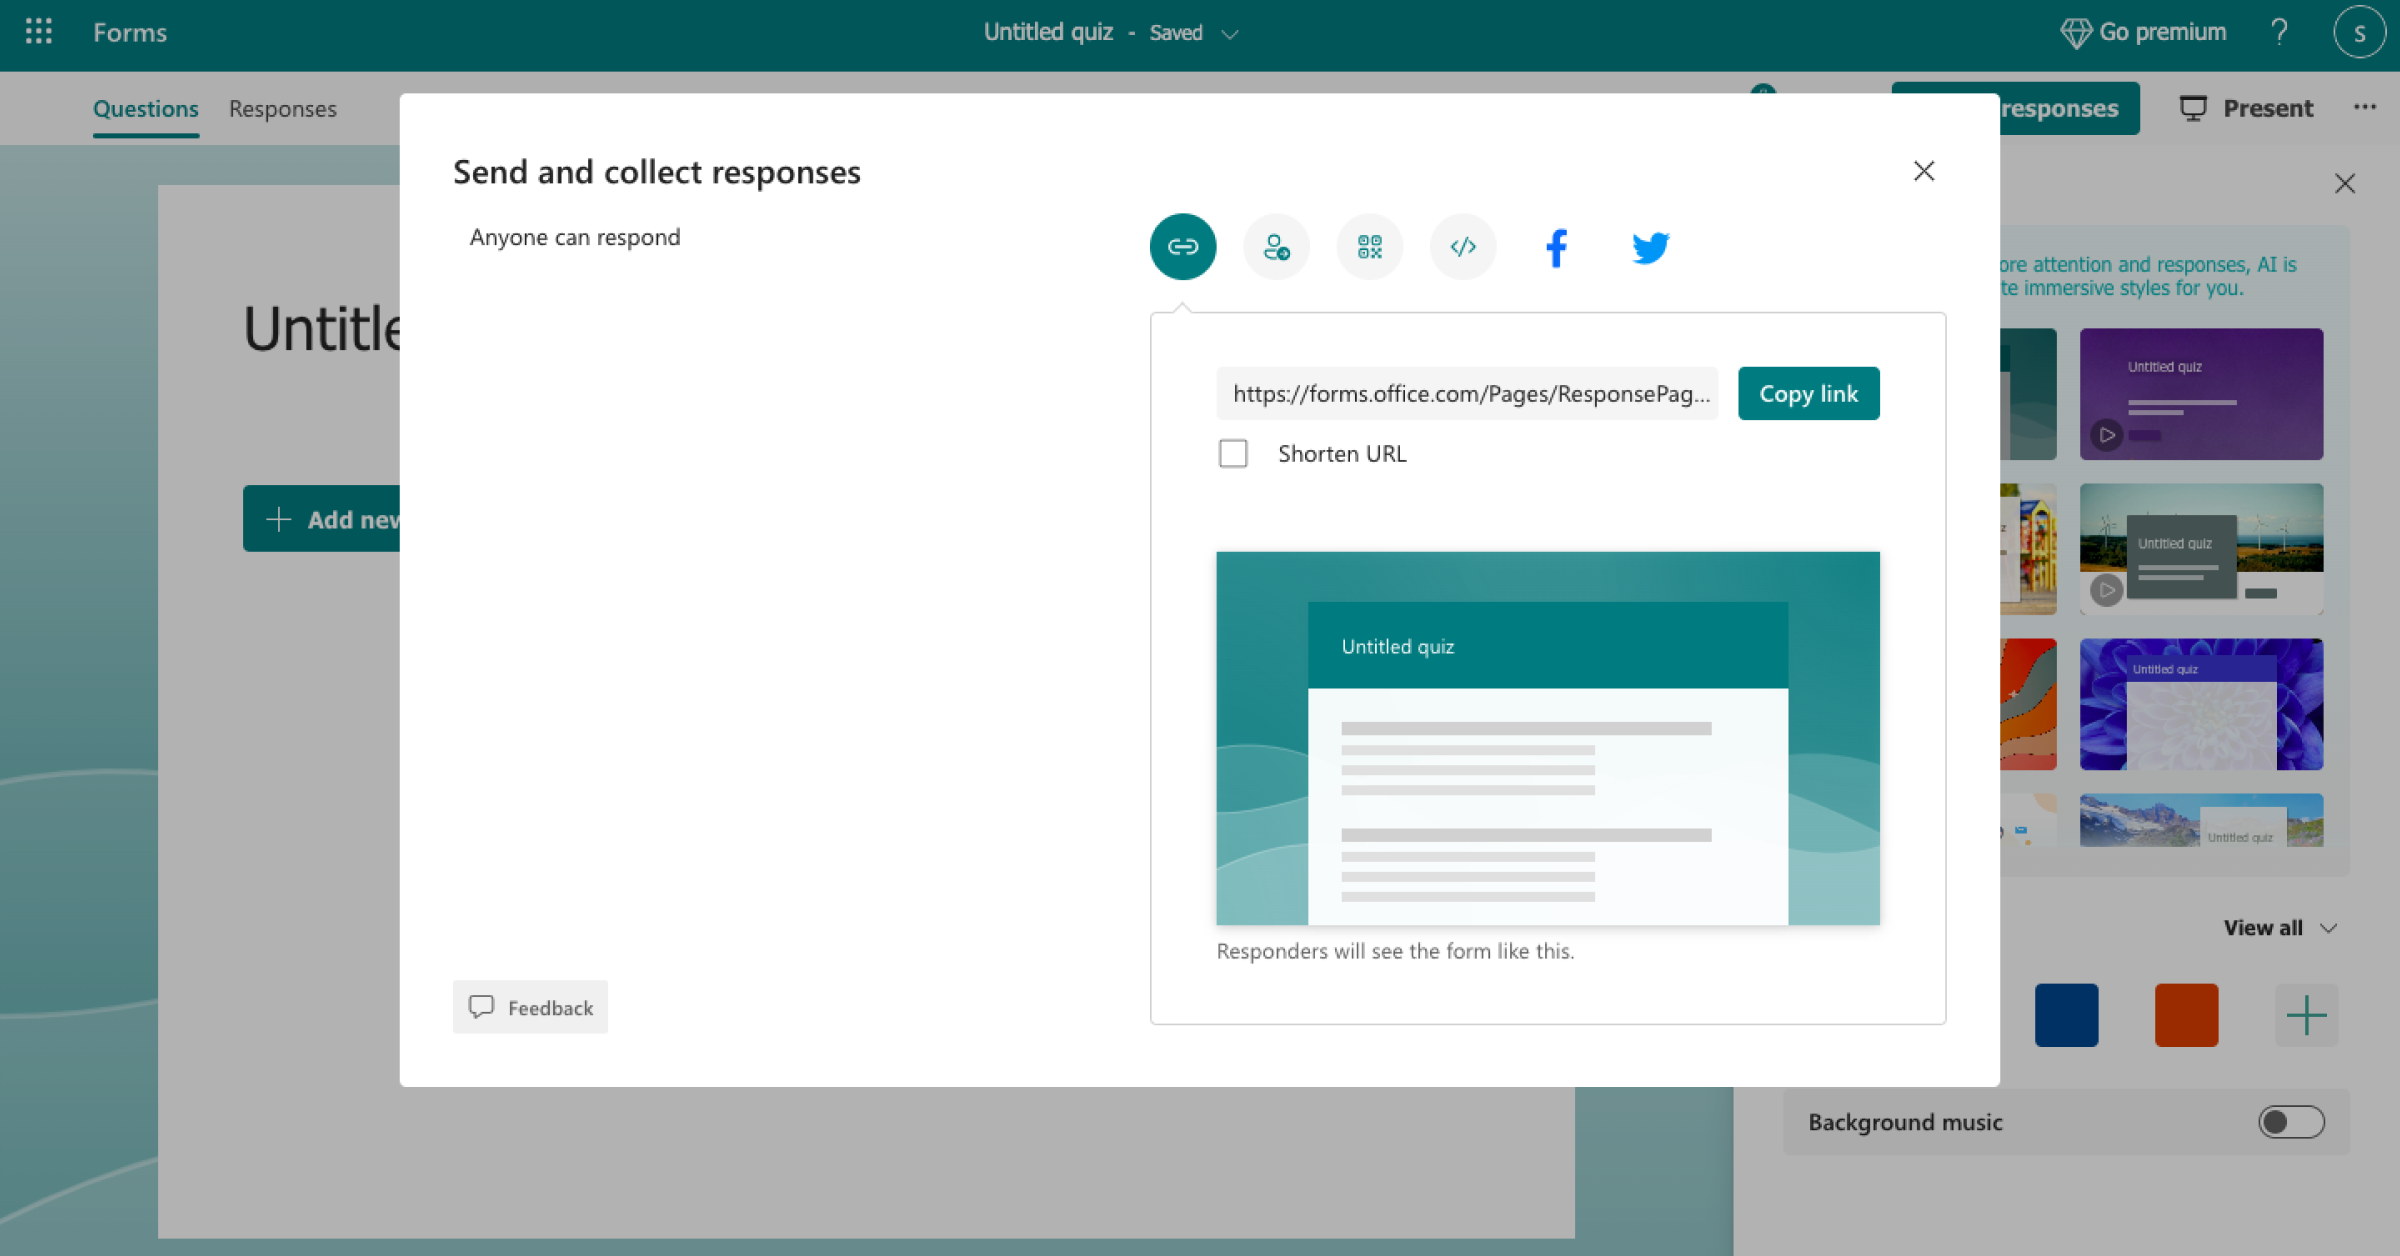 How to collect anonymous employee feedback with Microsoft Forms?